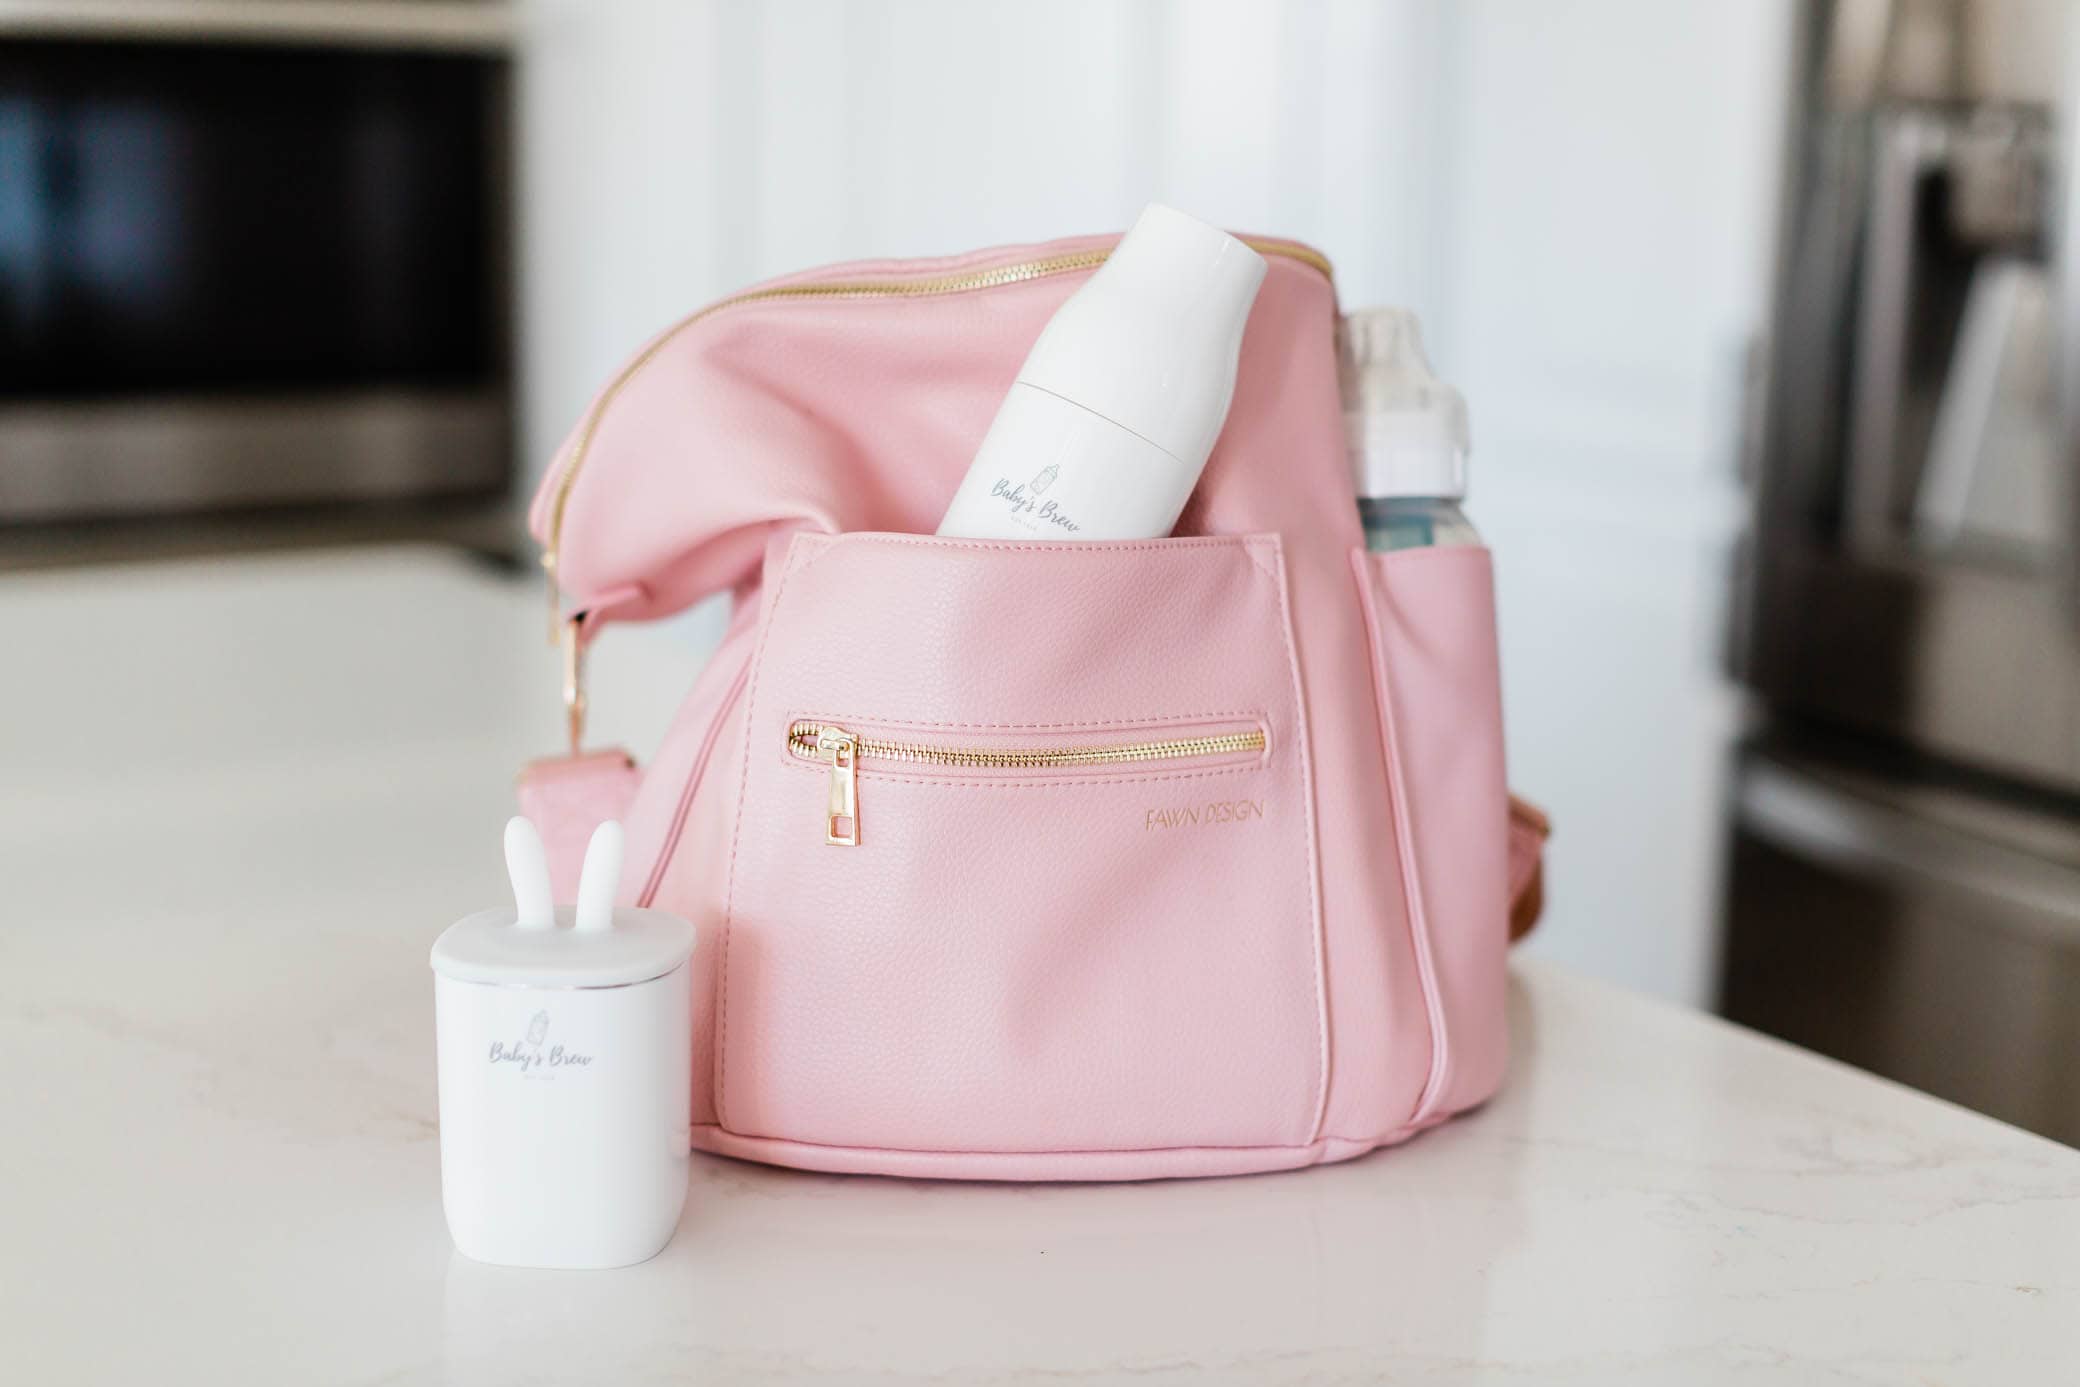 Baby's Brew products inside a pink diaper bag sitting on a kitchen counter.